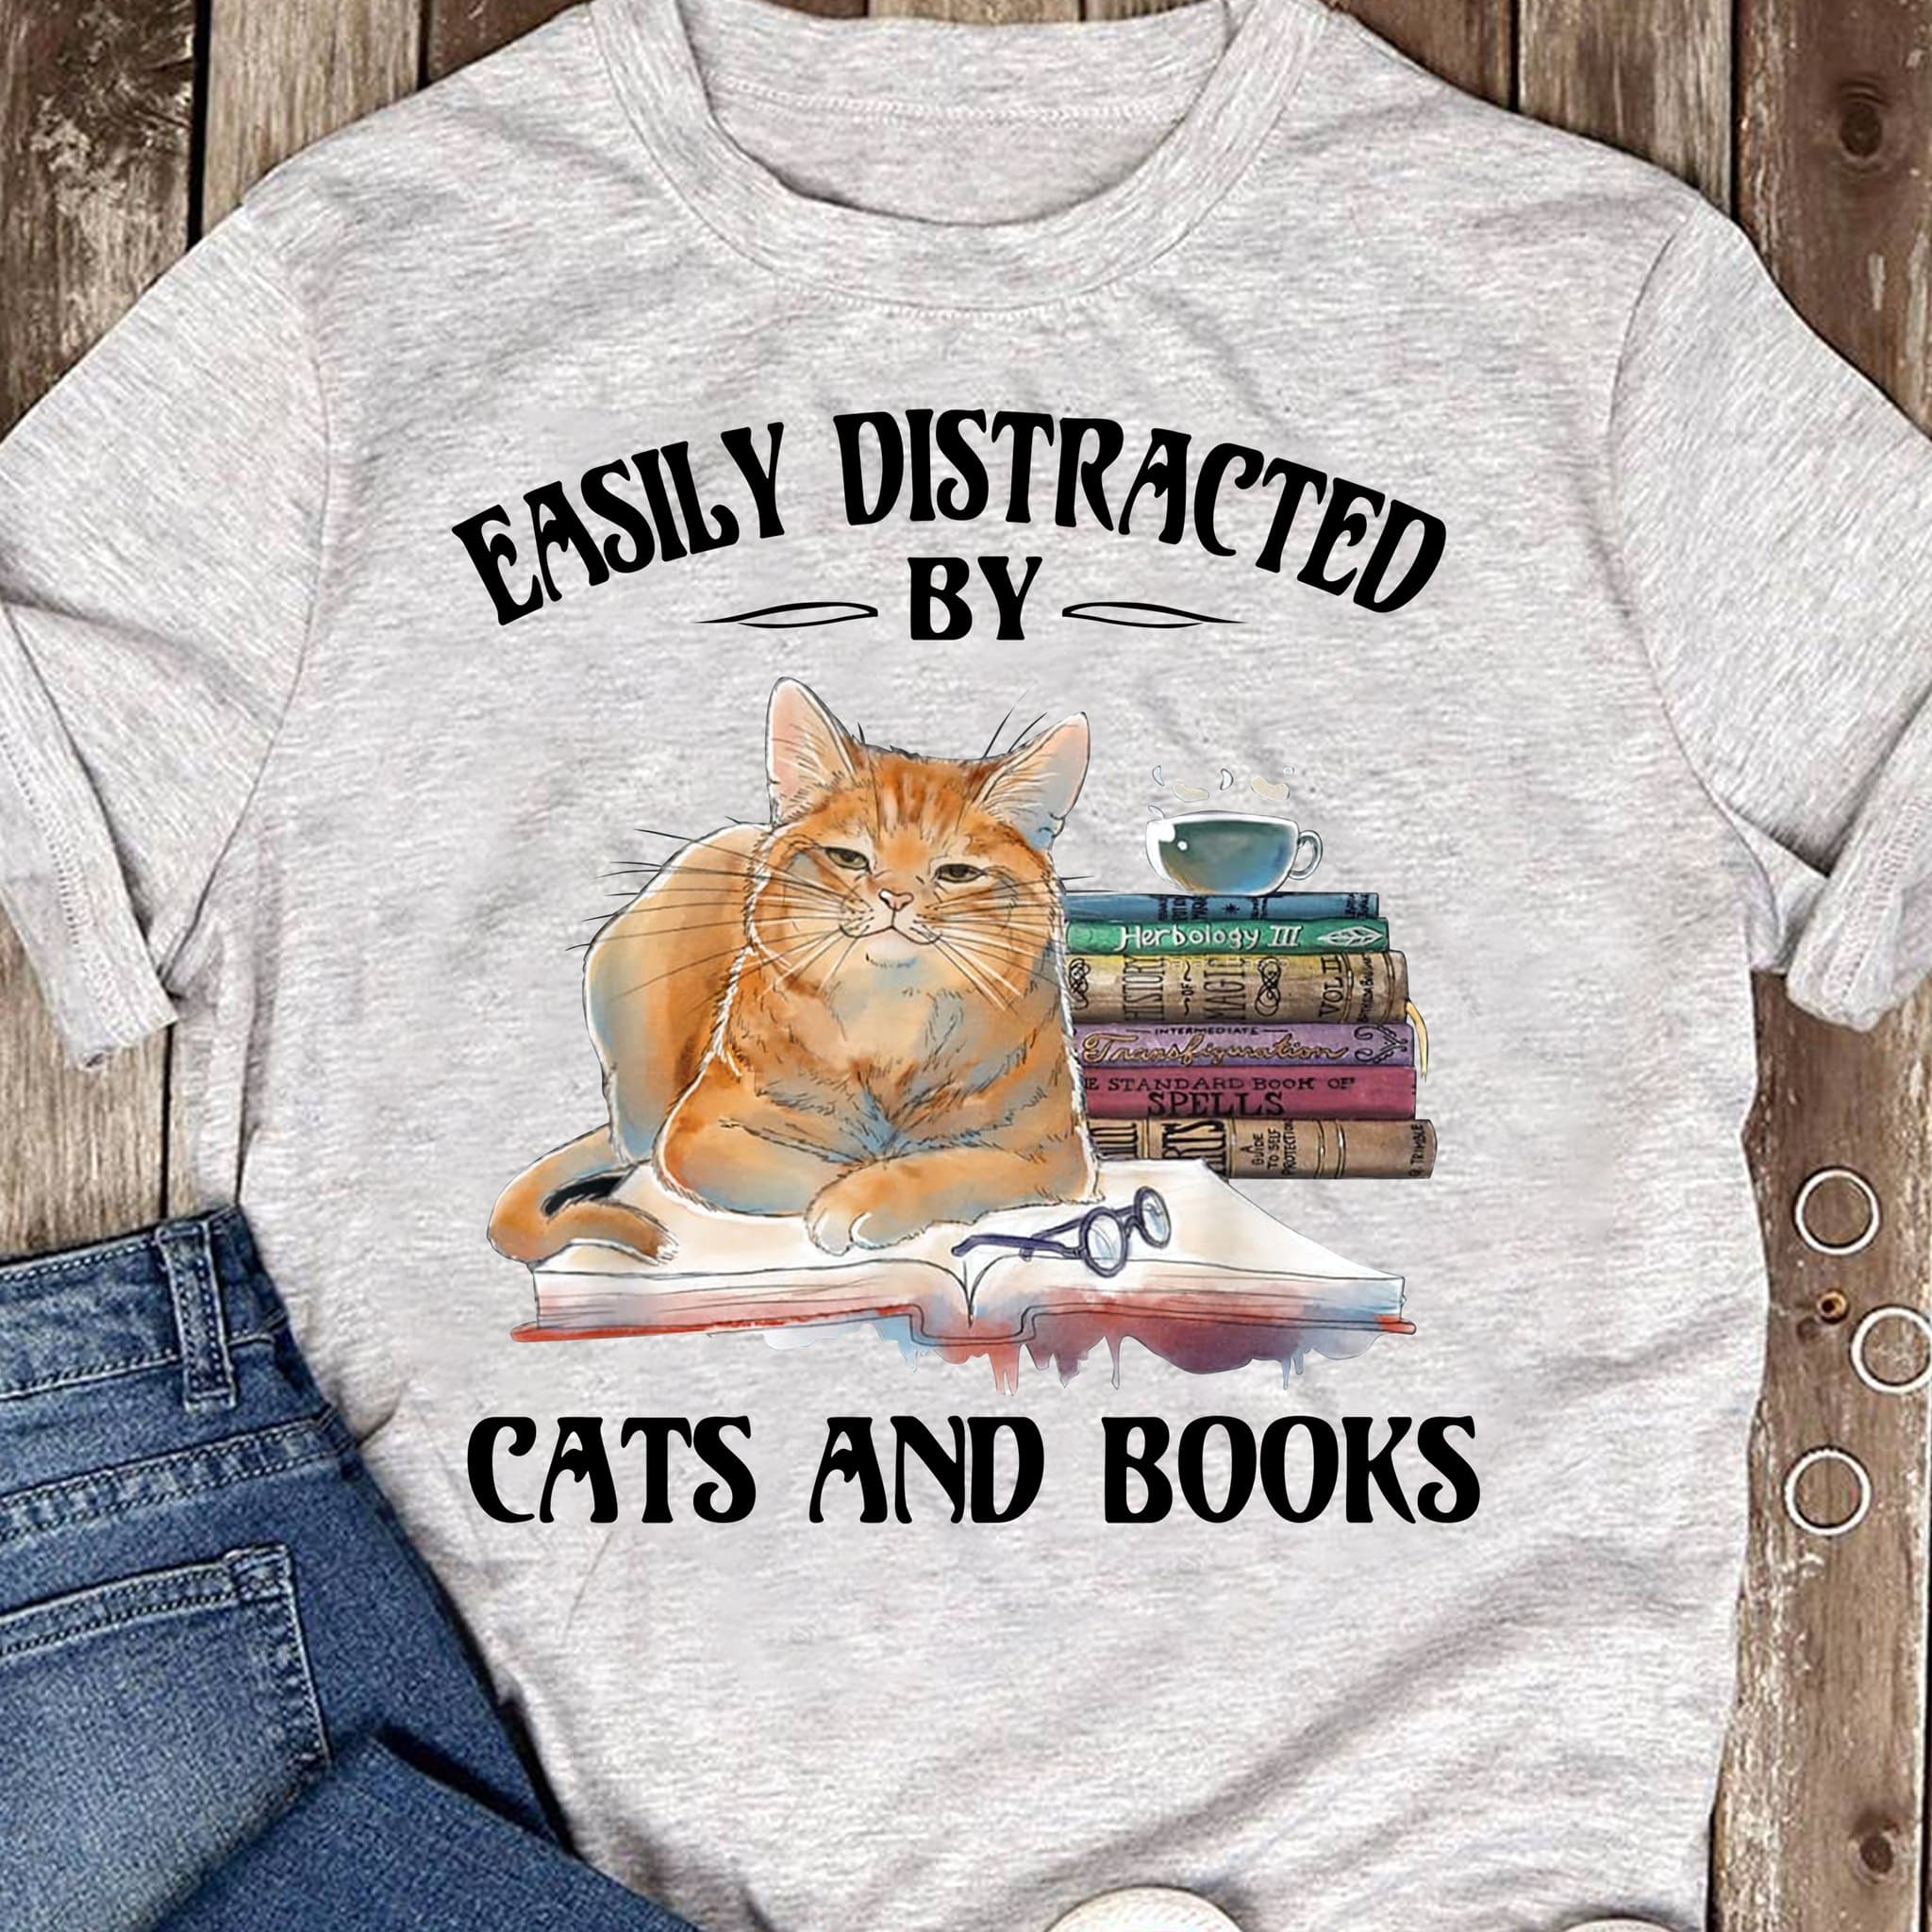 Cat Books - Easily distracted by cats and books